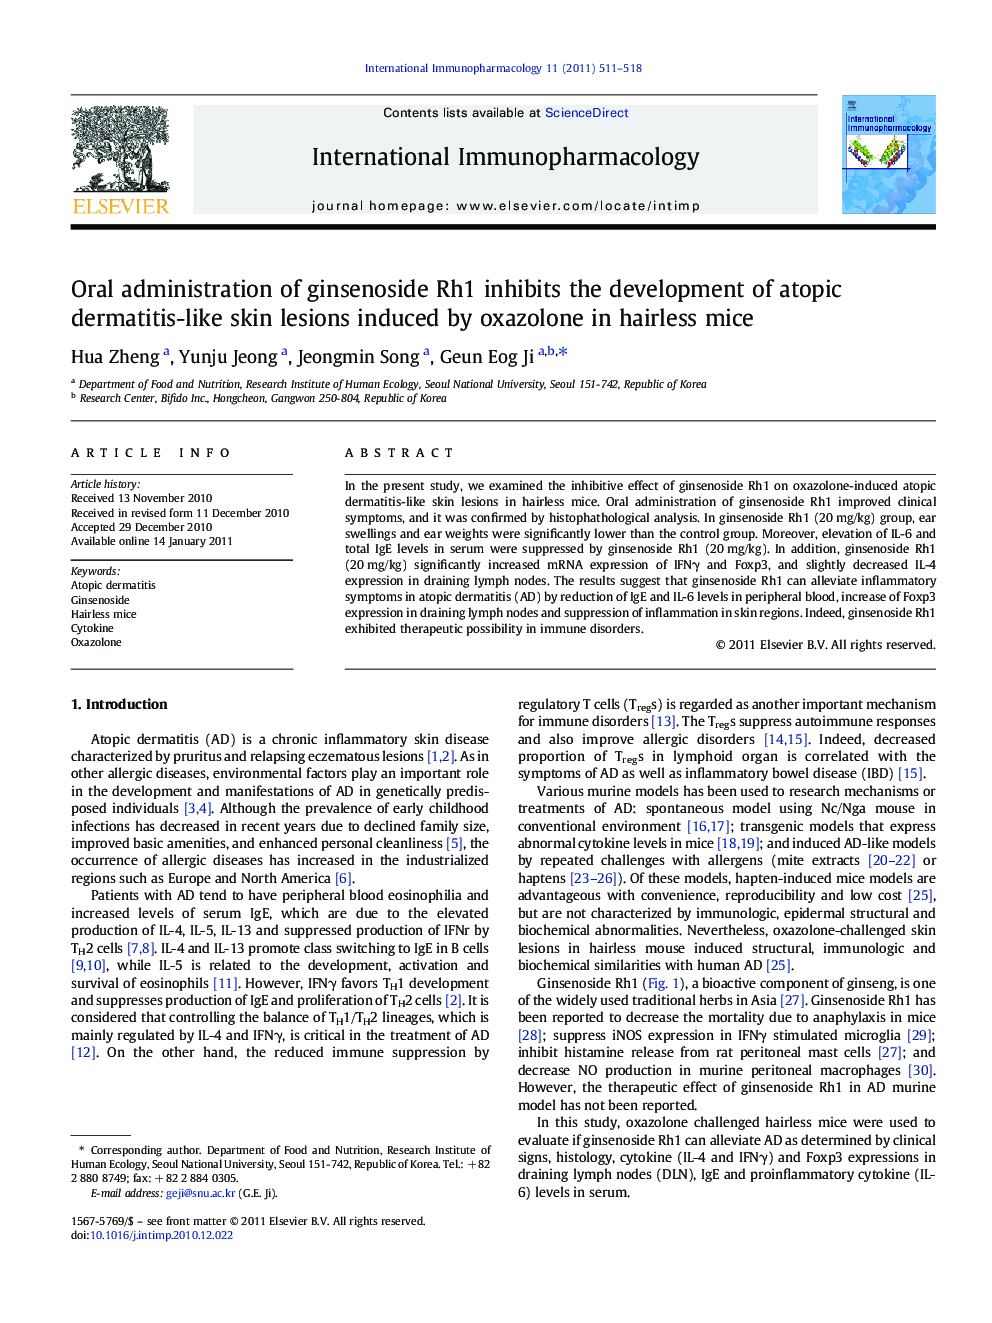 Oral administration of ginsenoside Rh1 inhibits the development of atopic dermatitis-like skin lesions induced by oxazolone in hairless mice